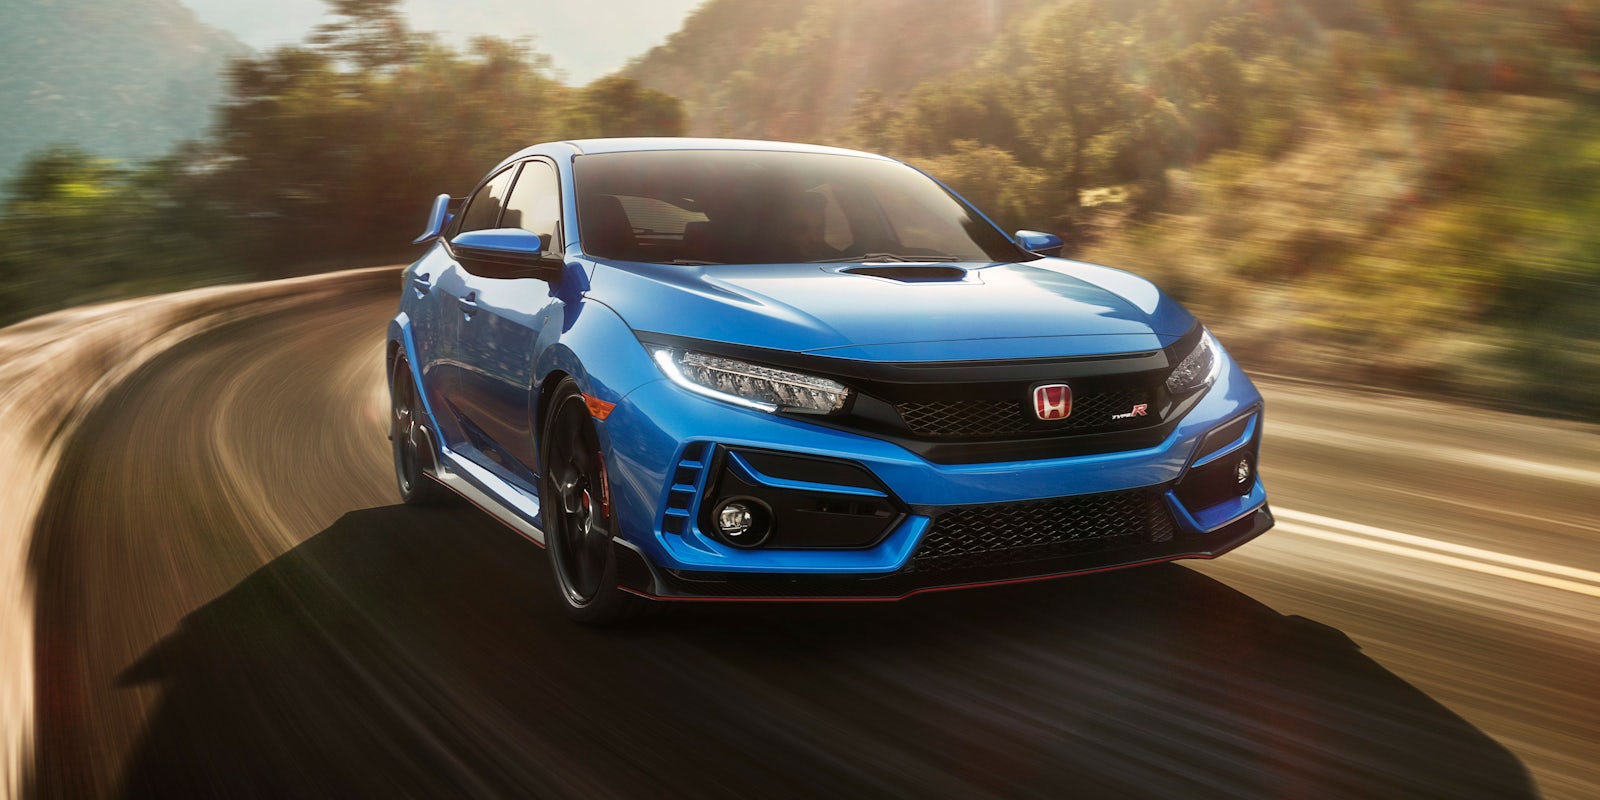 2020 Honda Civic Type R Price Specs And Release Date Carwow